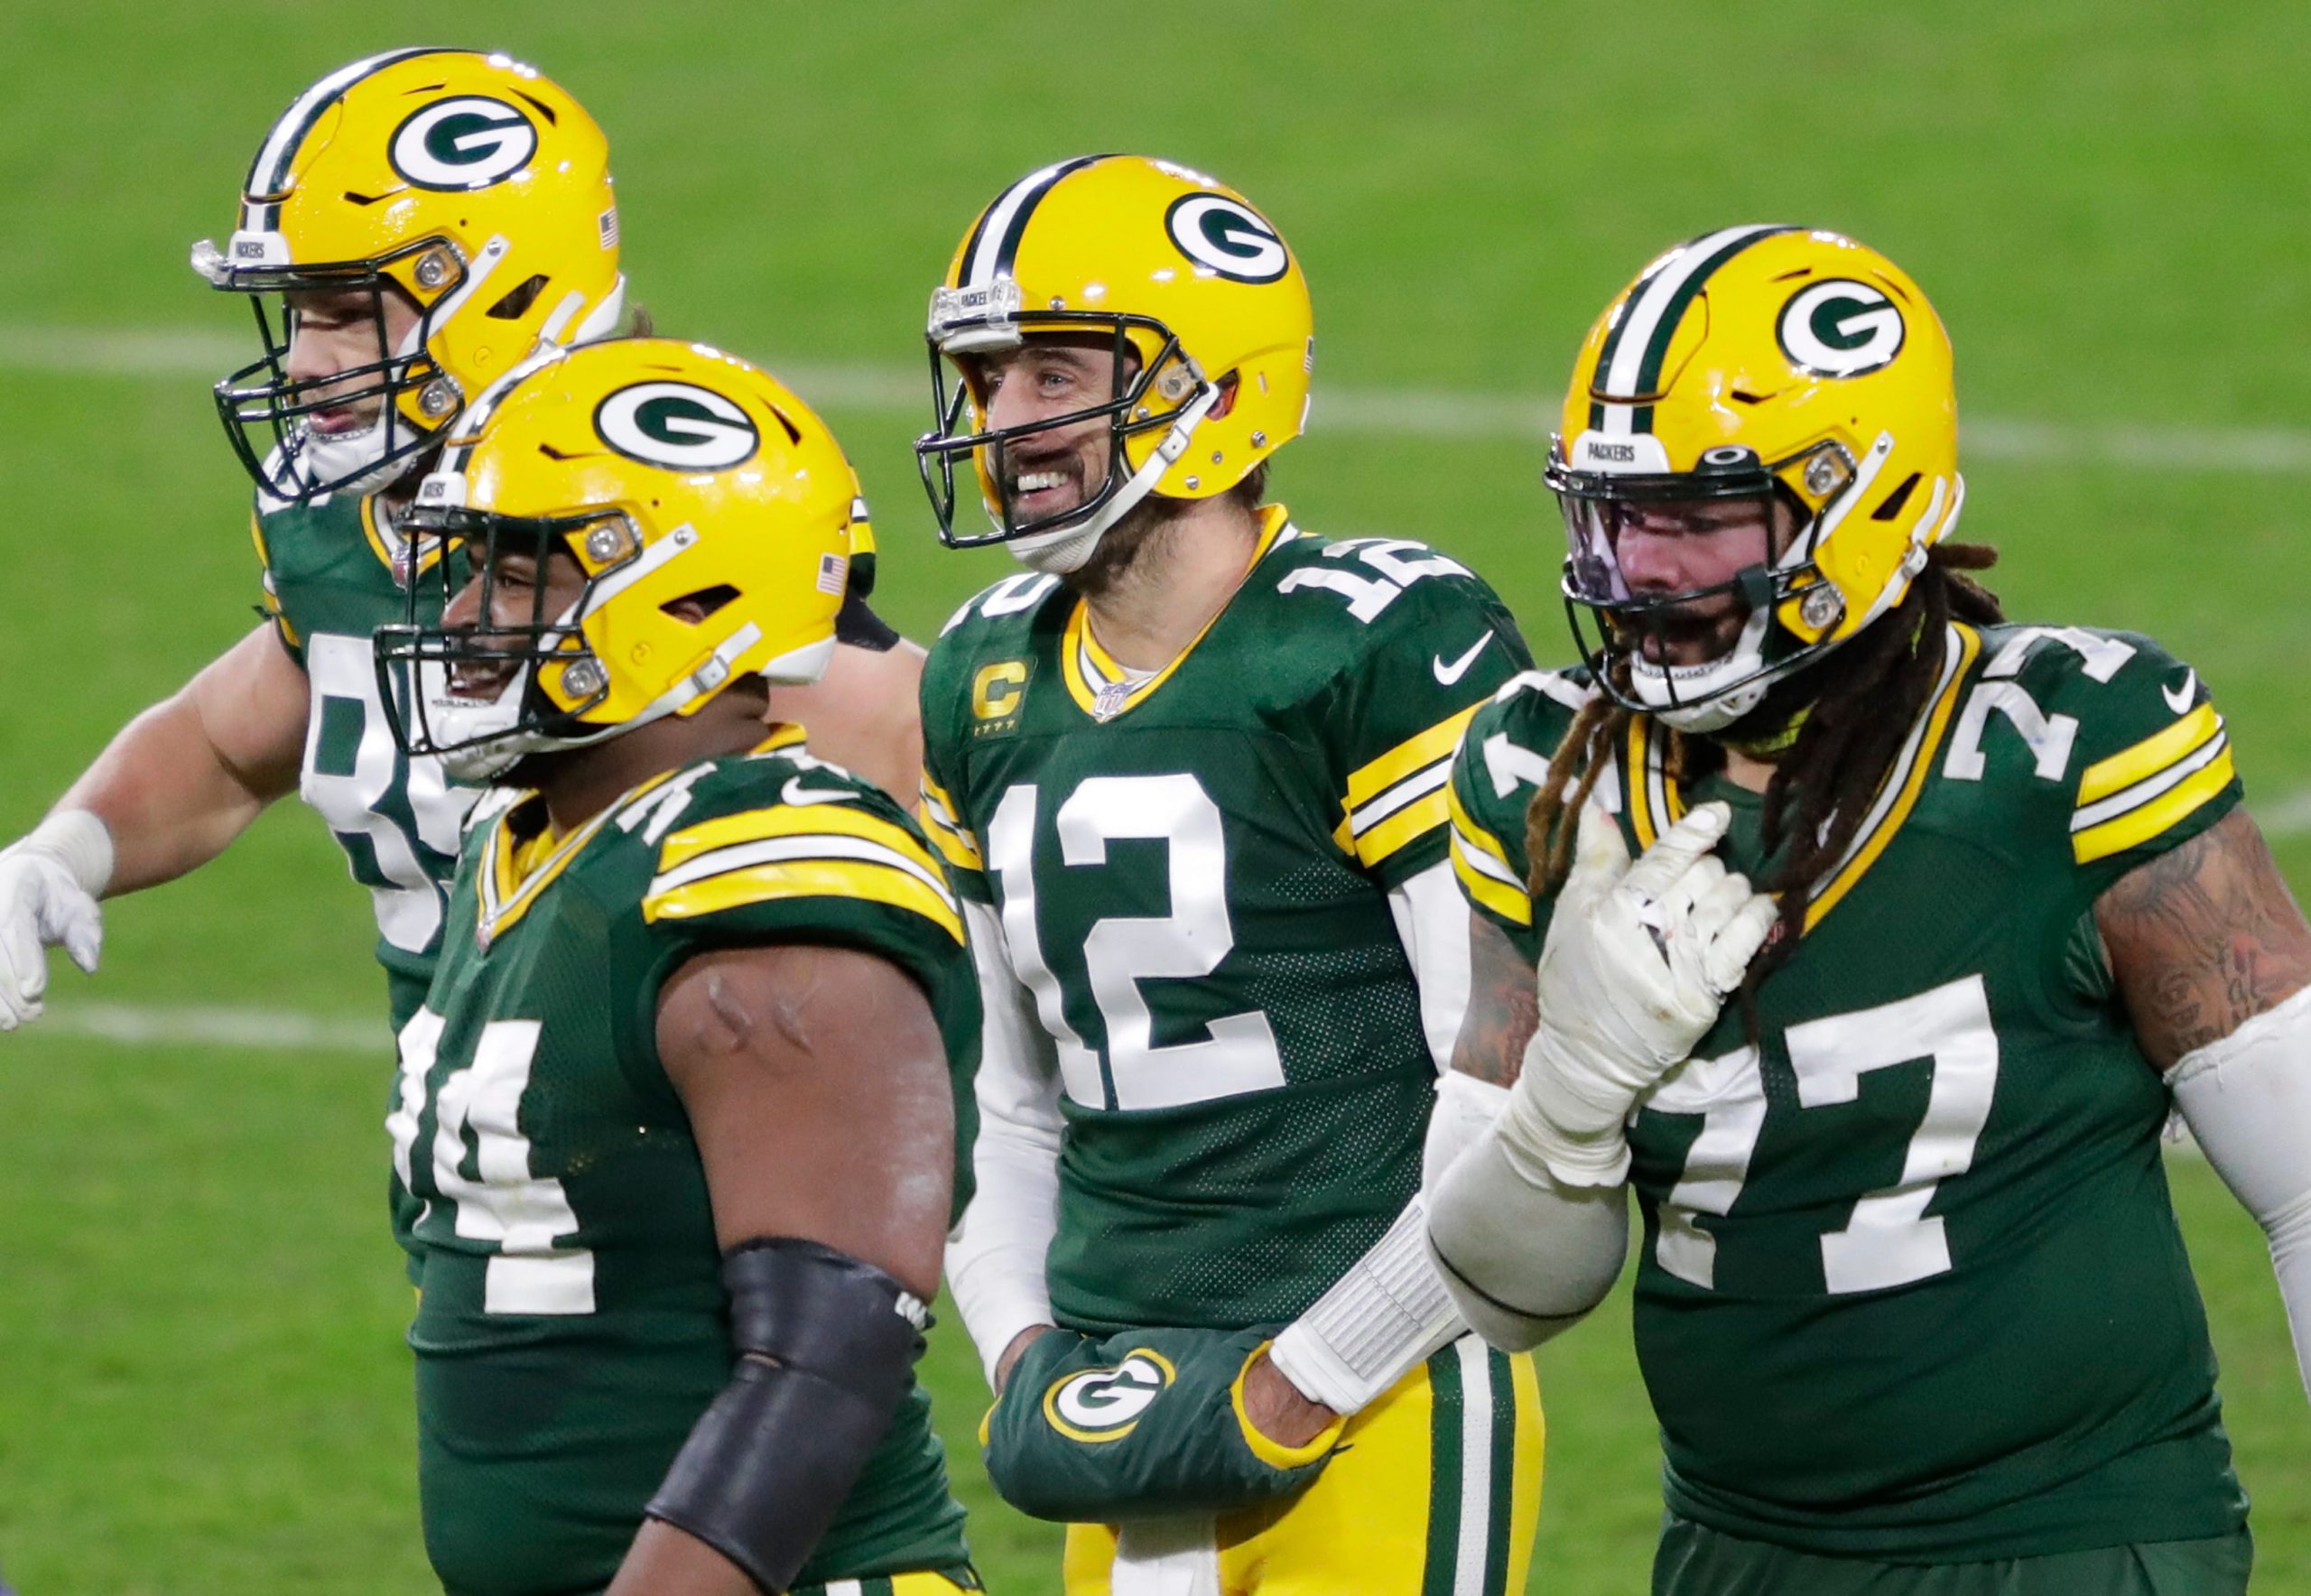 QB Aaron Rodgers (12) and the Packers were all smiles Saturday night after dispatching the Rams.